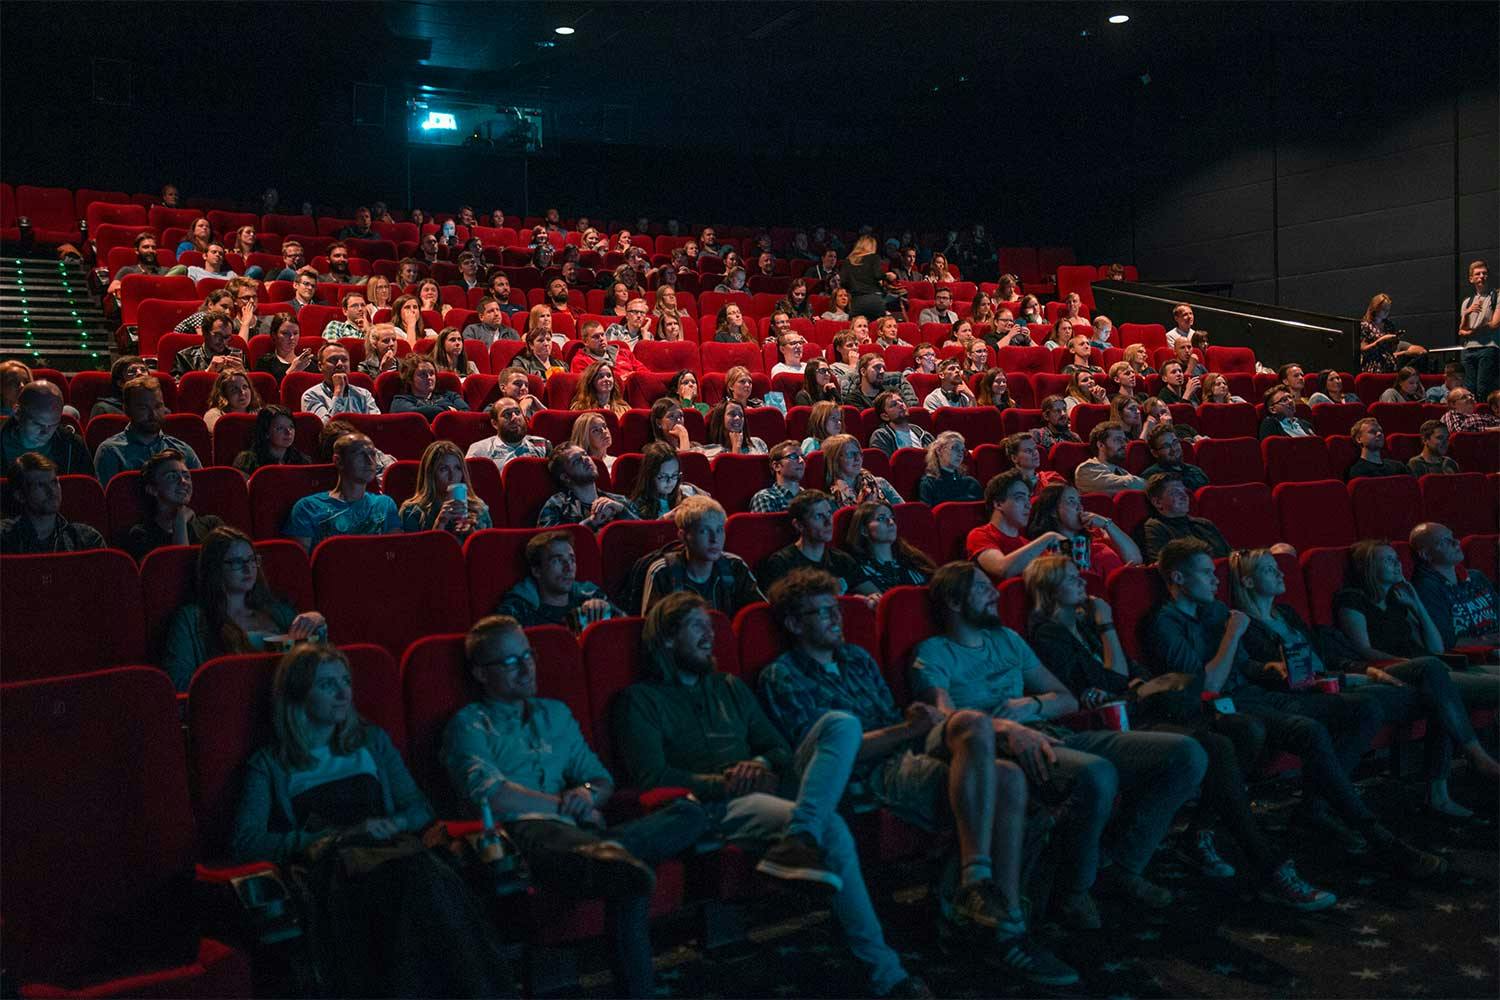 A movie theatre with red seats, seating an almost full audience. The front row is lit softly by the blue light of the screen.